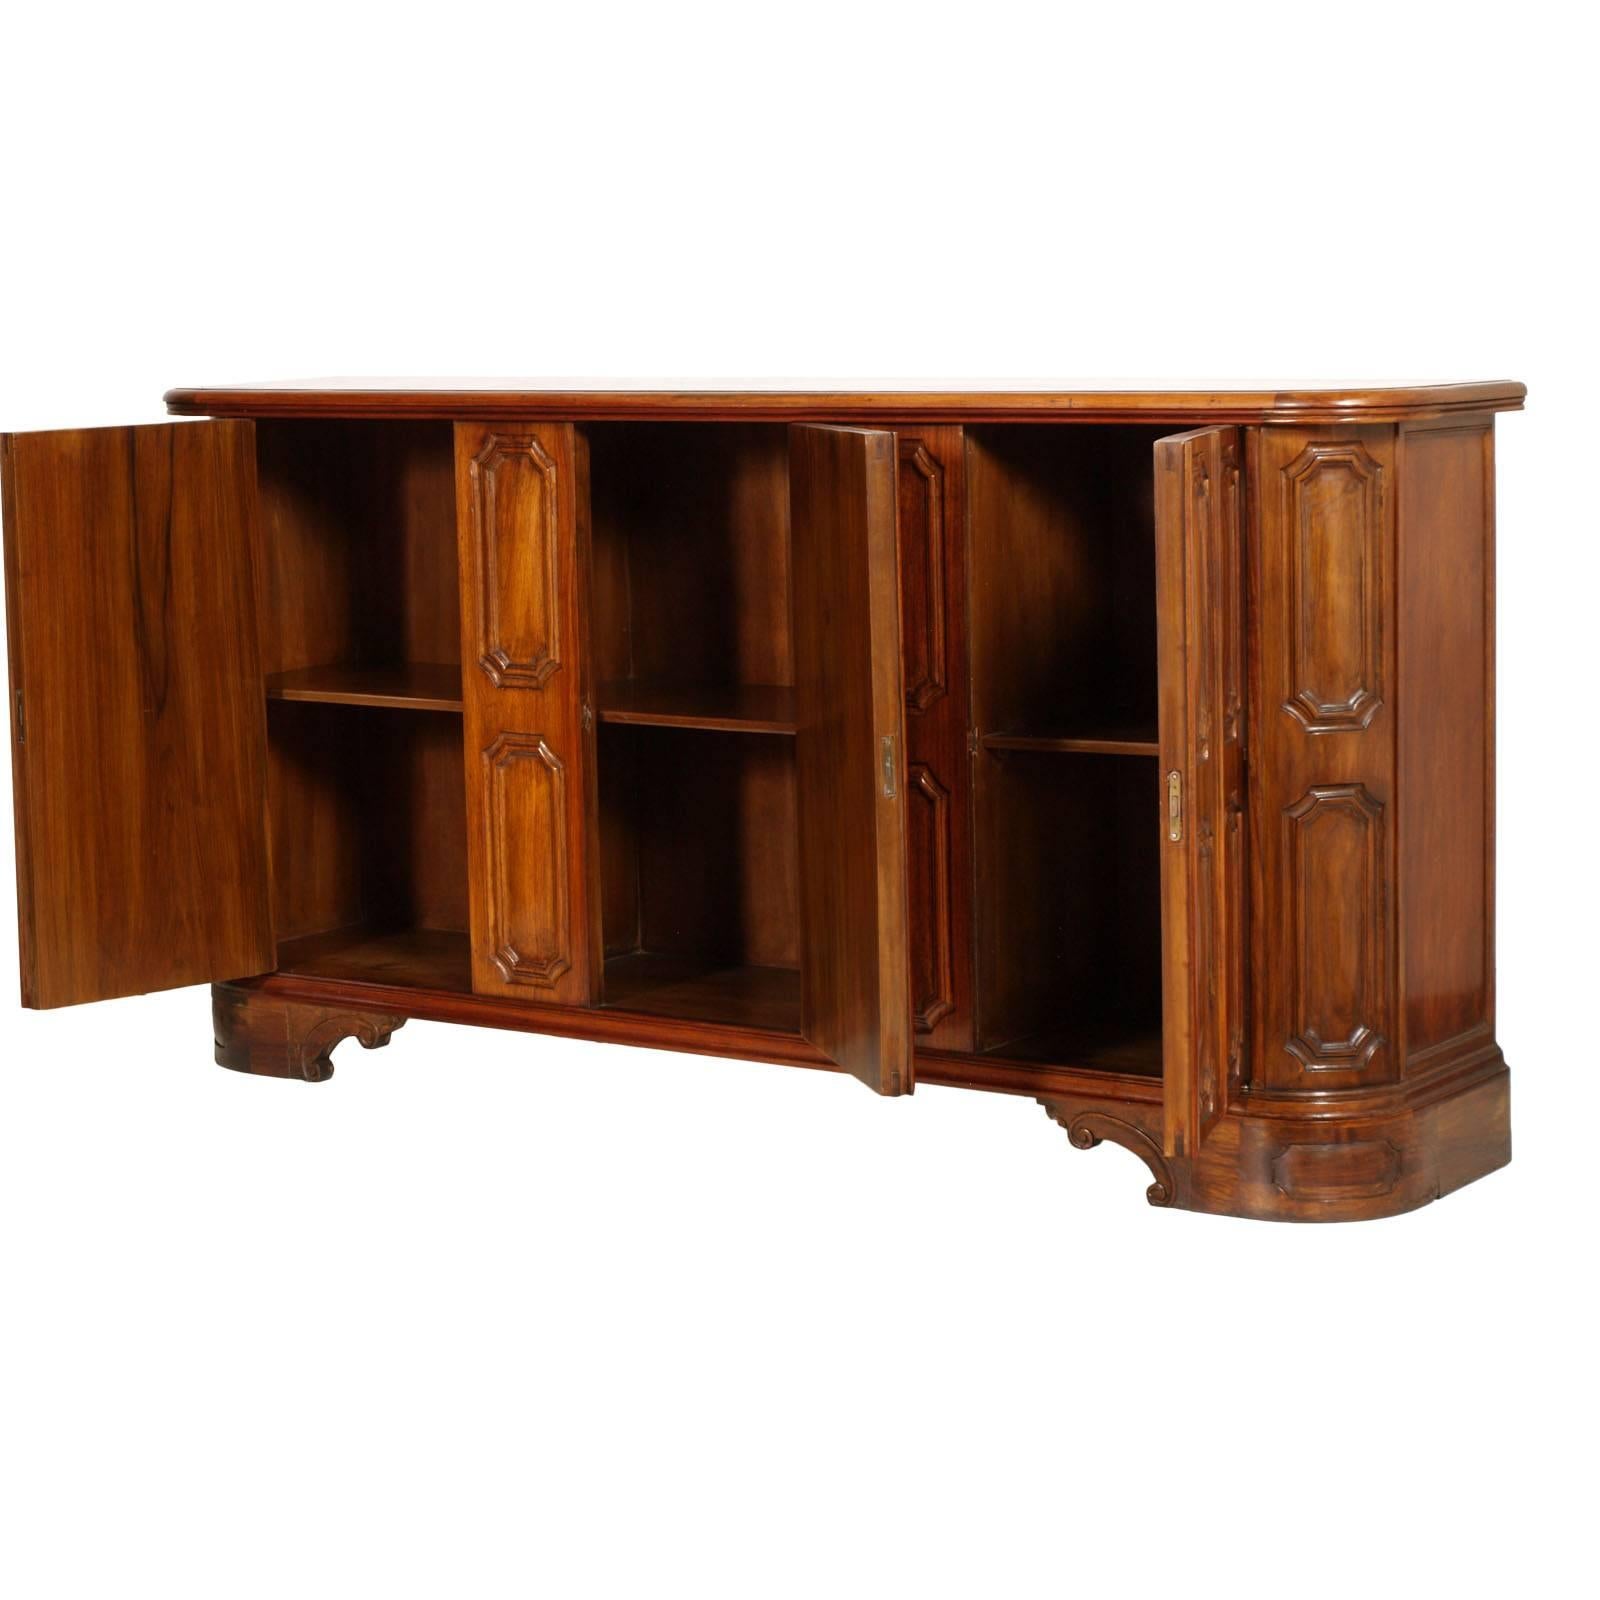 Elegant Tuscanmid 20th century sideboard, credenza Renaissance style by Michele Bonciani, Cascina, in blond walnut restored and polished to wax

Measures cm: H 100, W 200, D 42.